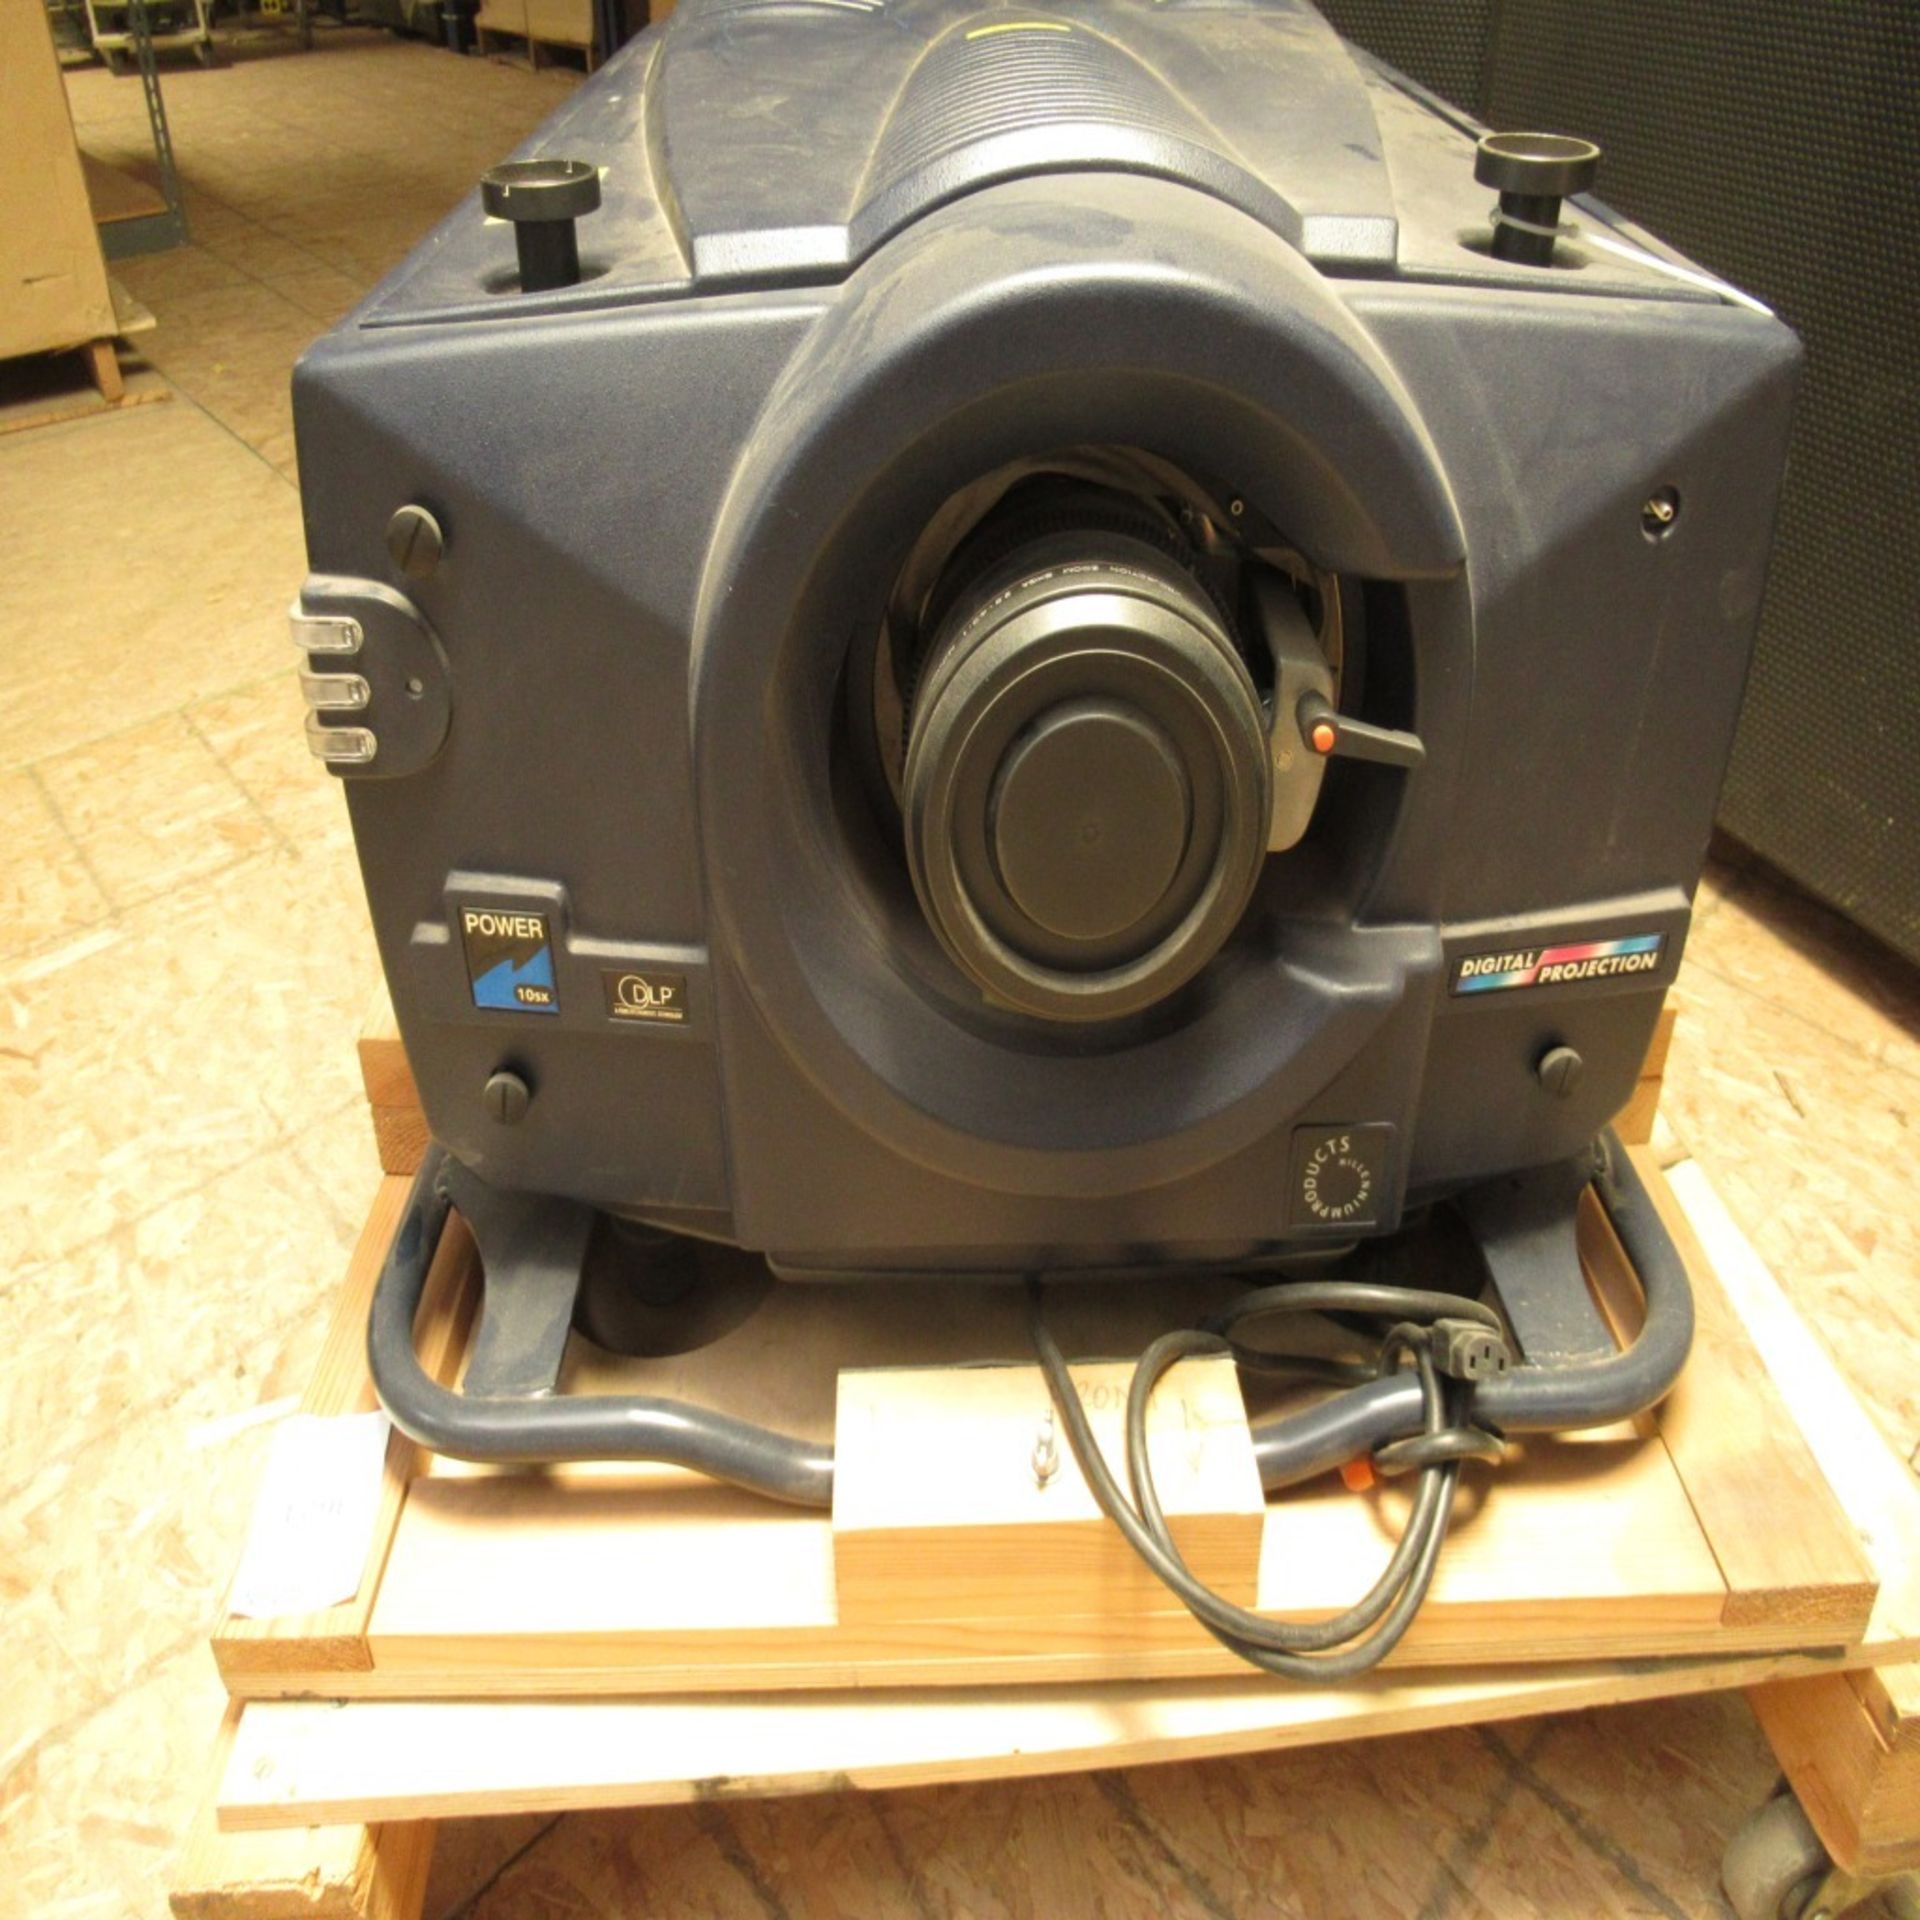 LOT OF 2- PROXIMA PRO AV 9310 PROJECTOR & MILLENIUM PRODUCTS POWER 10SX DIGITAL PROJECTION UNIT - - Image 2 of 5